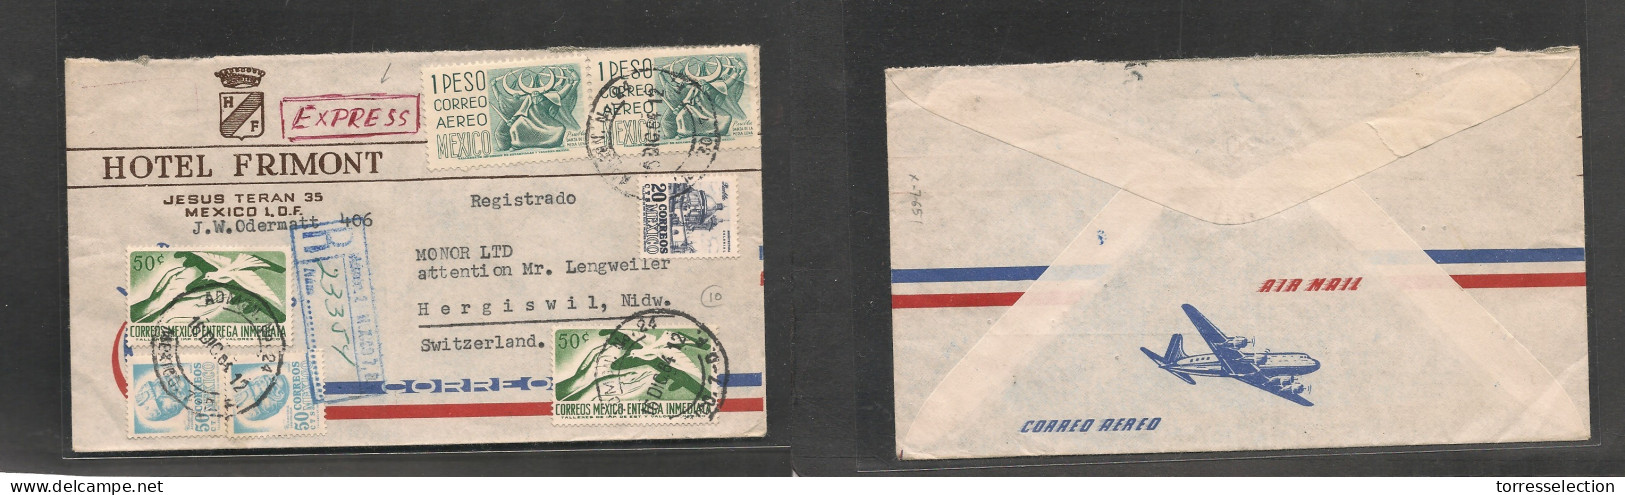 MEXICO. Mexico Cover - 1964 DF To Switz Hergiswil Registr Express Mult Fkd Env Hotel Frimont Mixed Issues, Fine XSALE. - Mexique